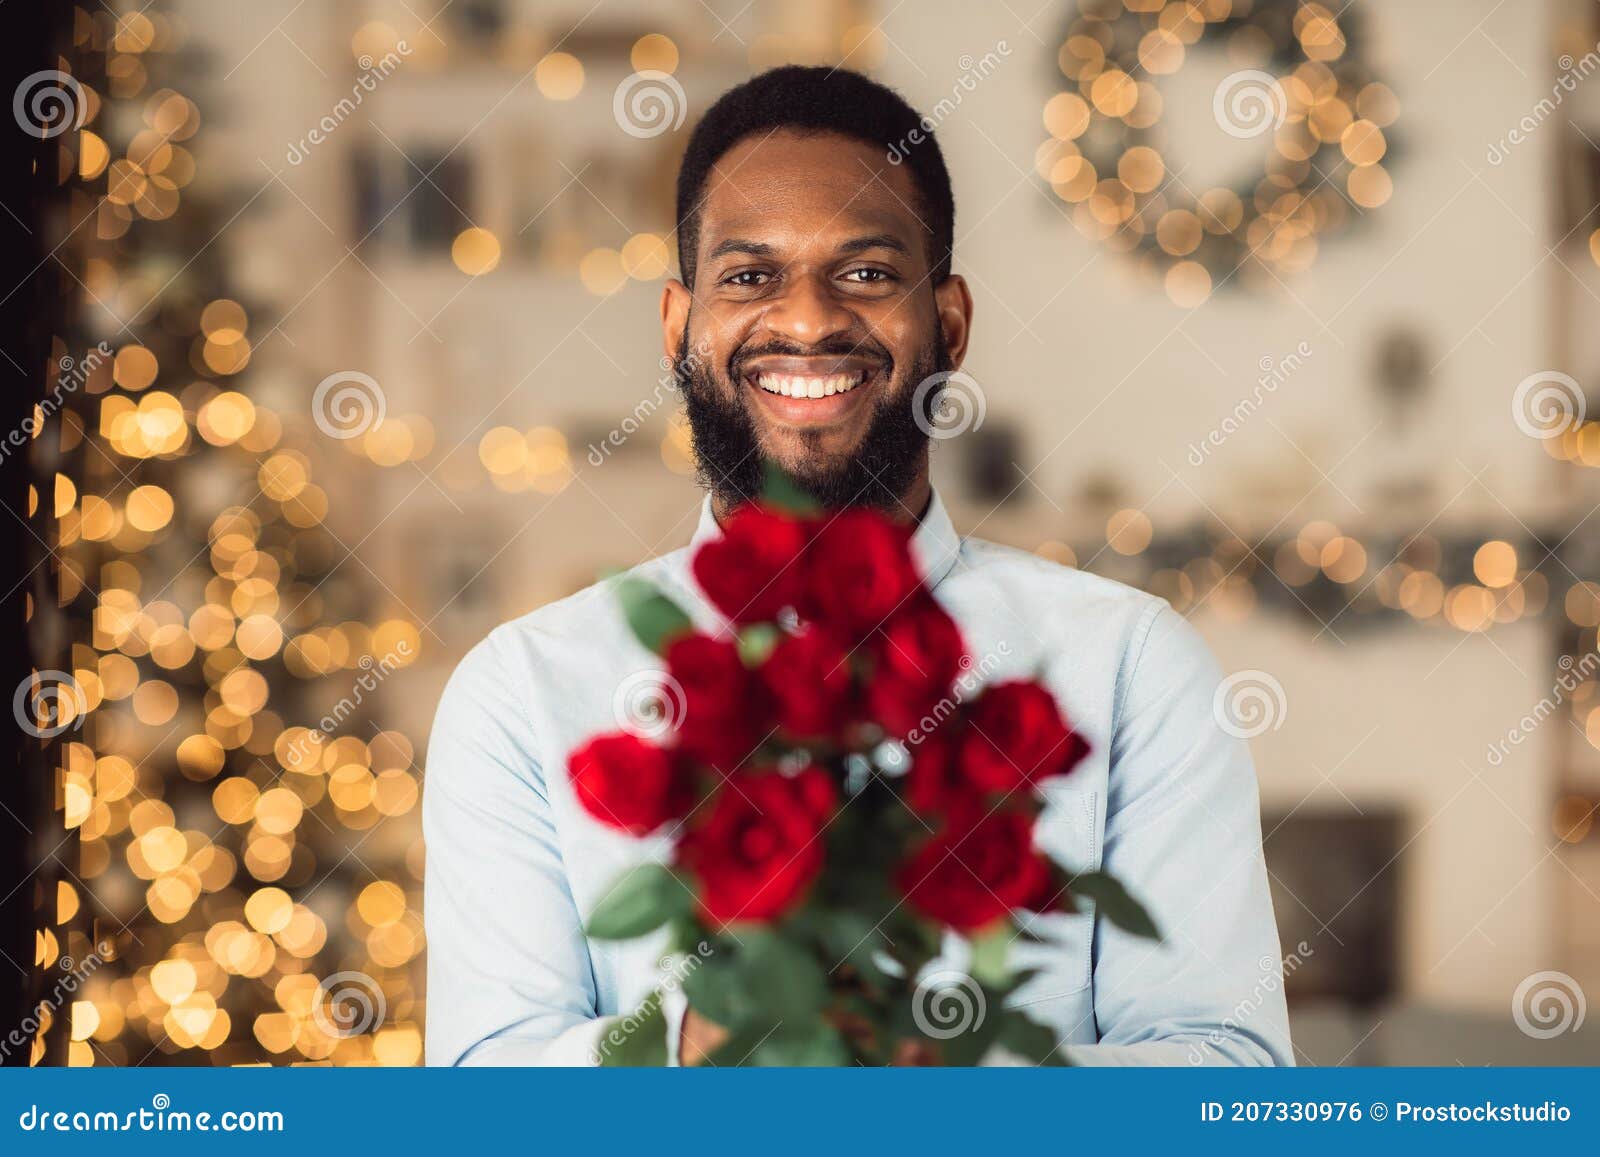 smiling-black-man-holding-roses-giving-to-camera-date-concept-portrait-happy-bearded-young-guy-bunch-fresh-flowers-bouquet-207330976.jpg